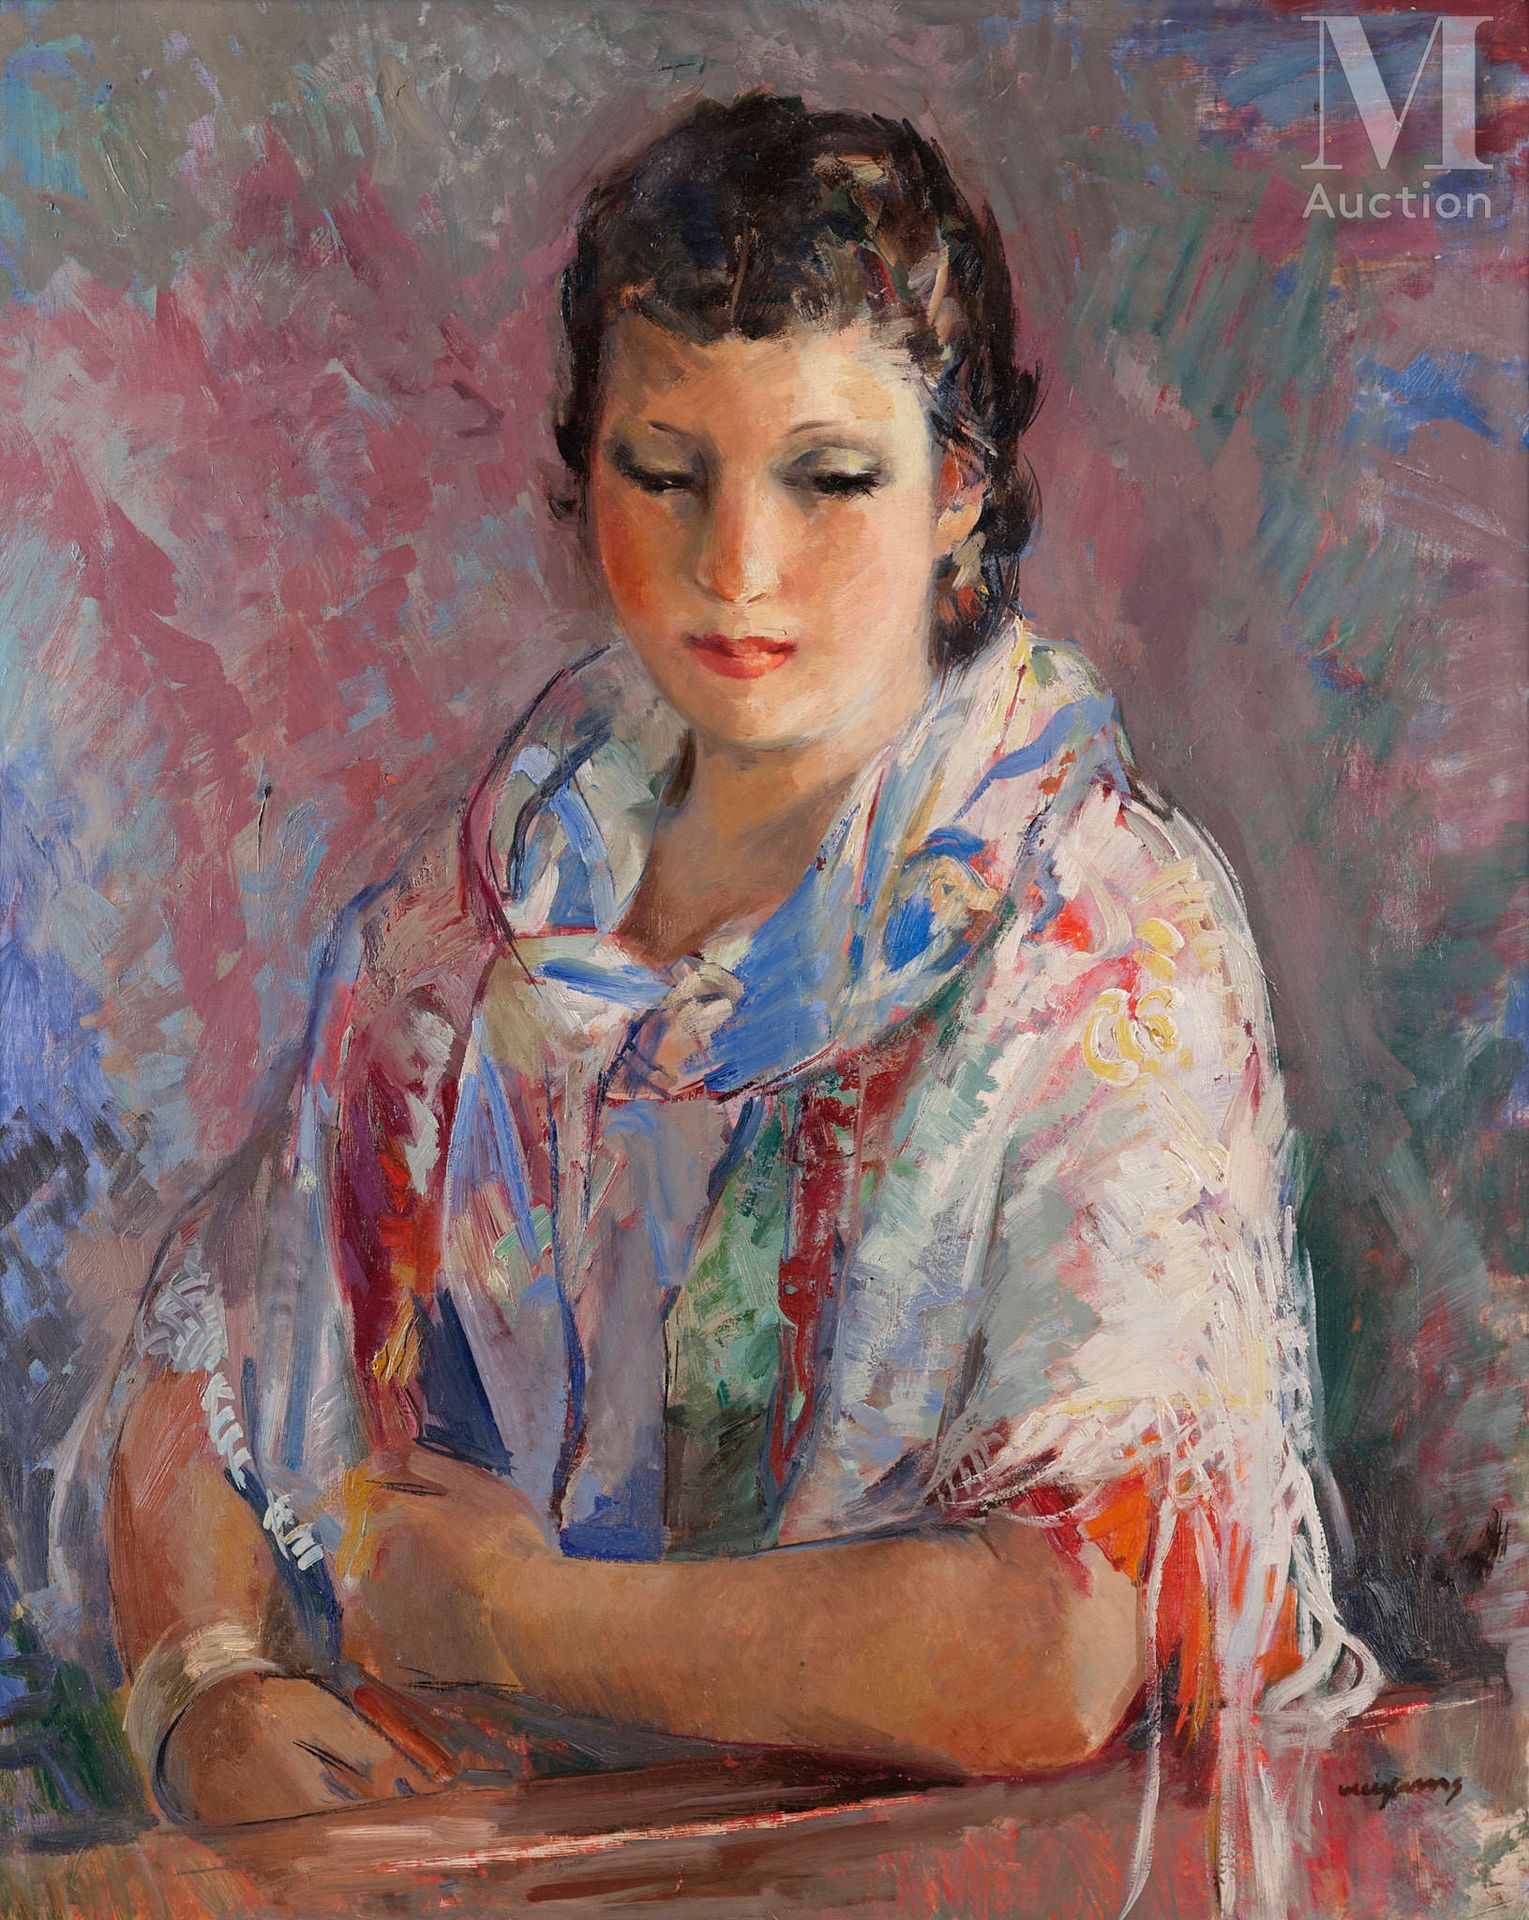 Pedro CREIXAMS (Barcelone 1901-1984) Woman with shawl

Oil on original canvas, 
&hellip;